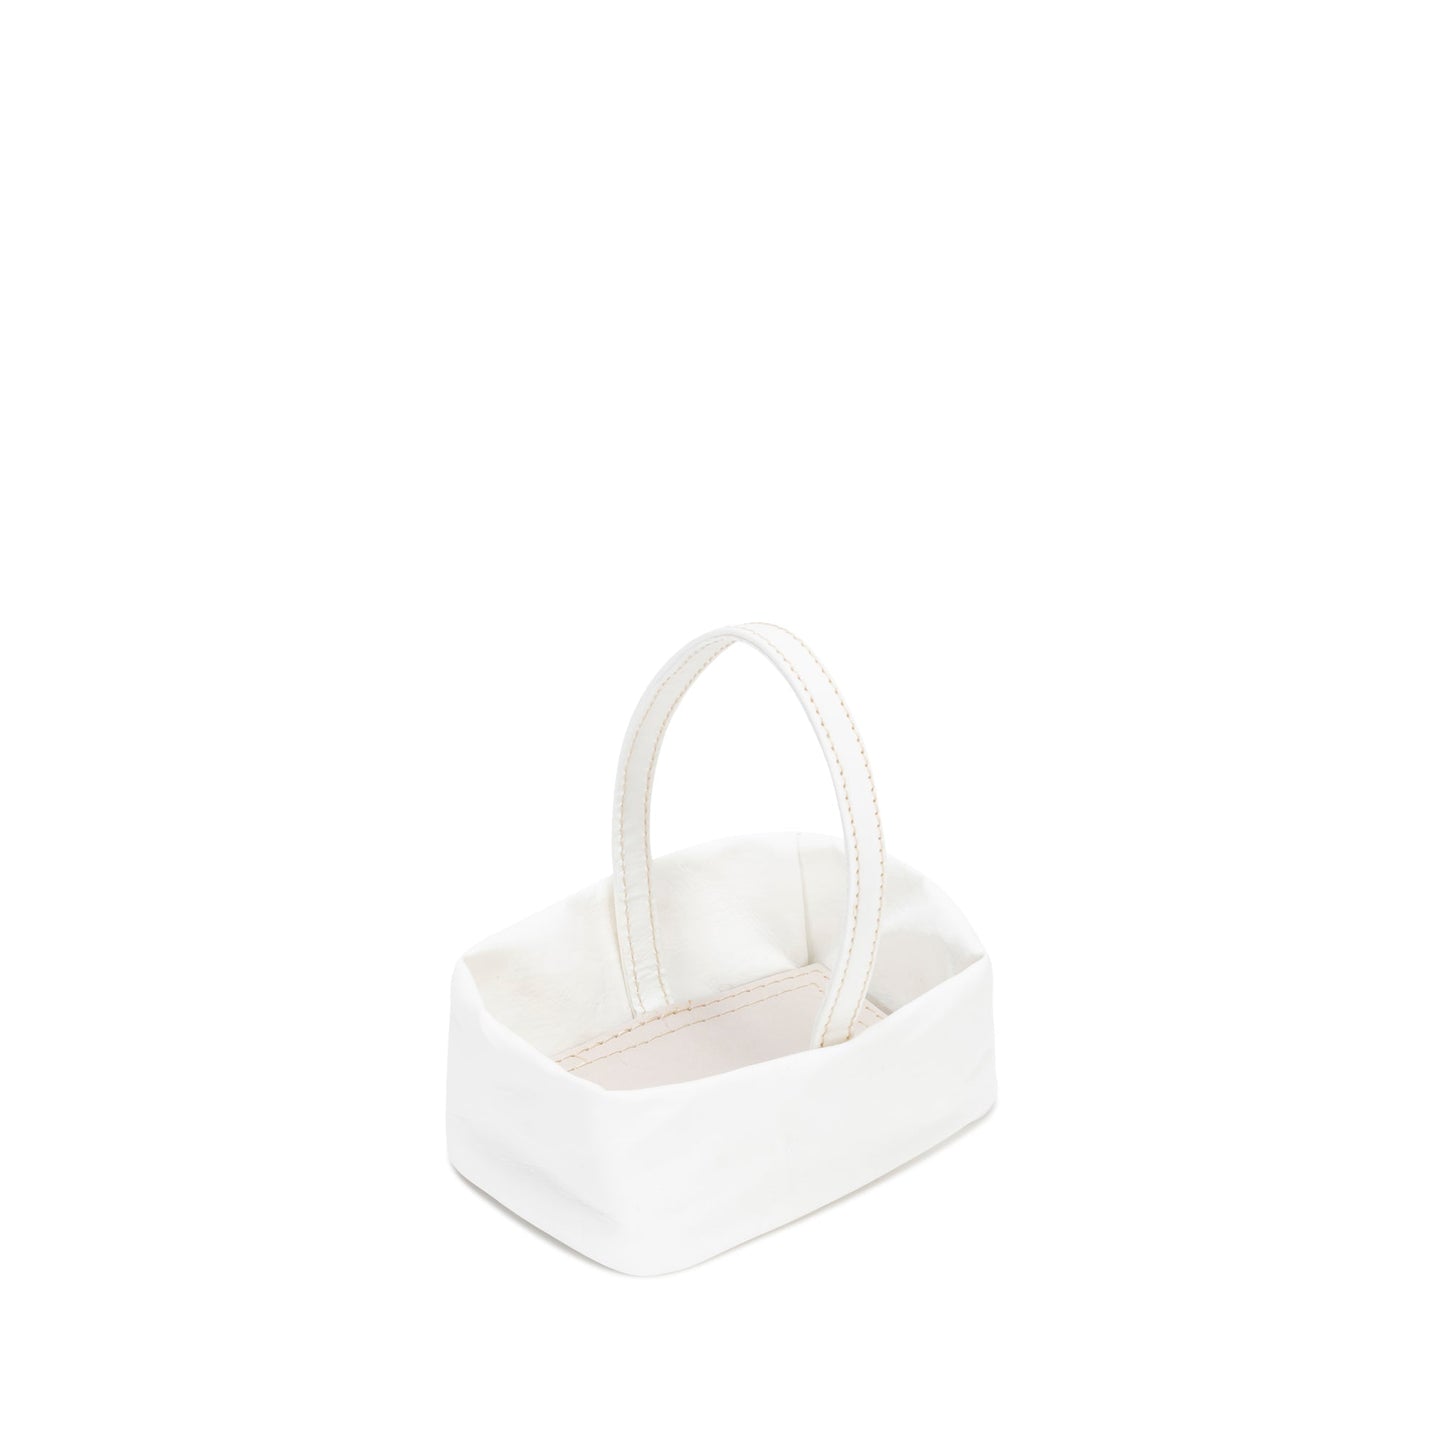 A small rectangular washable paper salt and pepper holder is shown with a washable paper small carry handle. The salt and pepper holder shown is white.